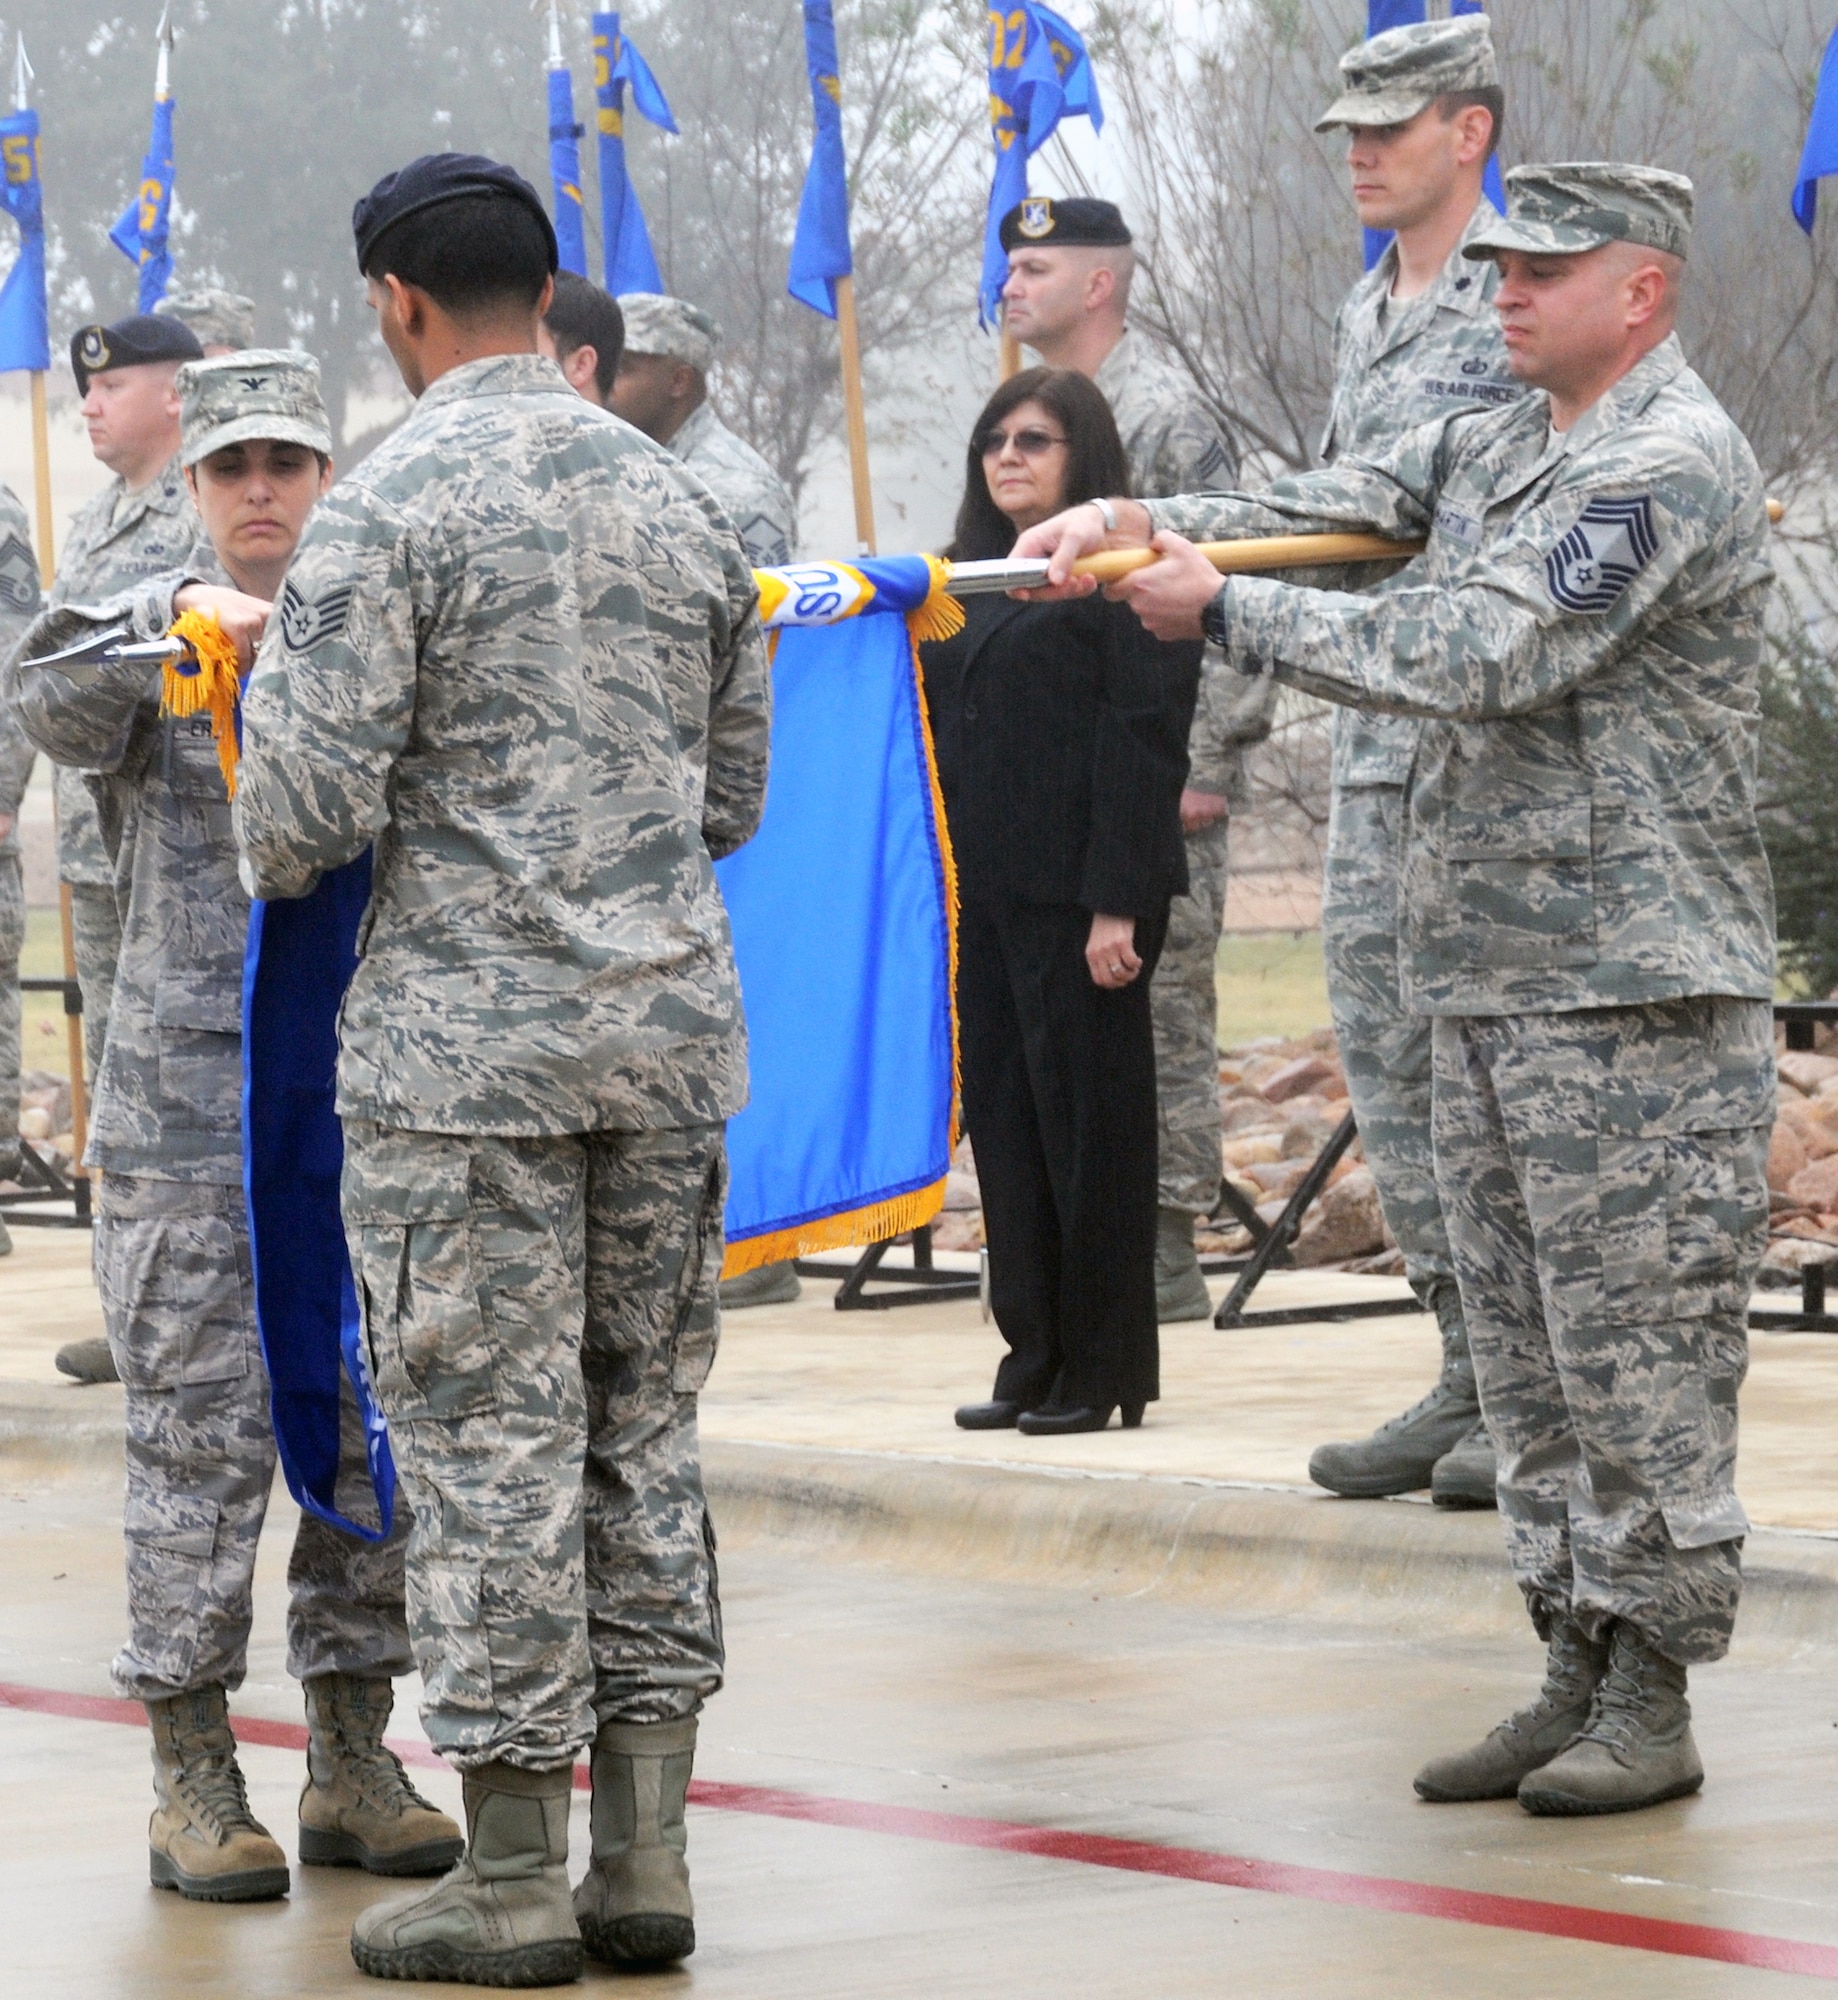 Col. Christine Erlewine cases the 902nd Mission Support Group colors for inactivation during the 502nd Air Base Wing transformation ceremony at Joint Base San Antonio-Fort Sam Houston Dec. 4. The 902nd MSG, which Erlewhine was the commander of, was redesignated as the 502nd Security Forces and Logistics Support Group at JBSA-Randolph. (U.S. Air Force photo by Steve Elliott)